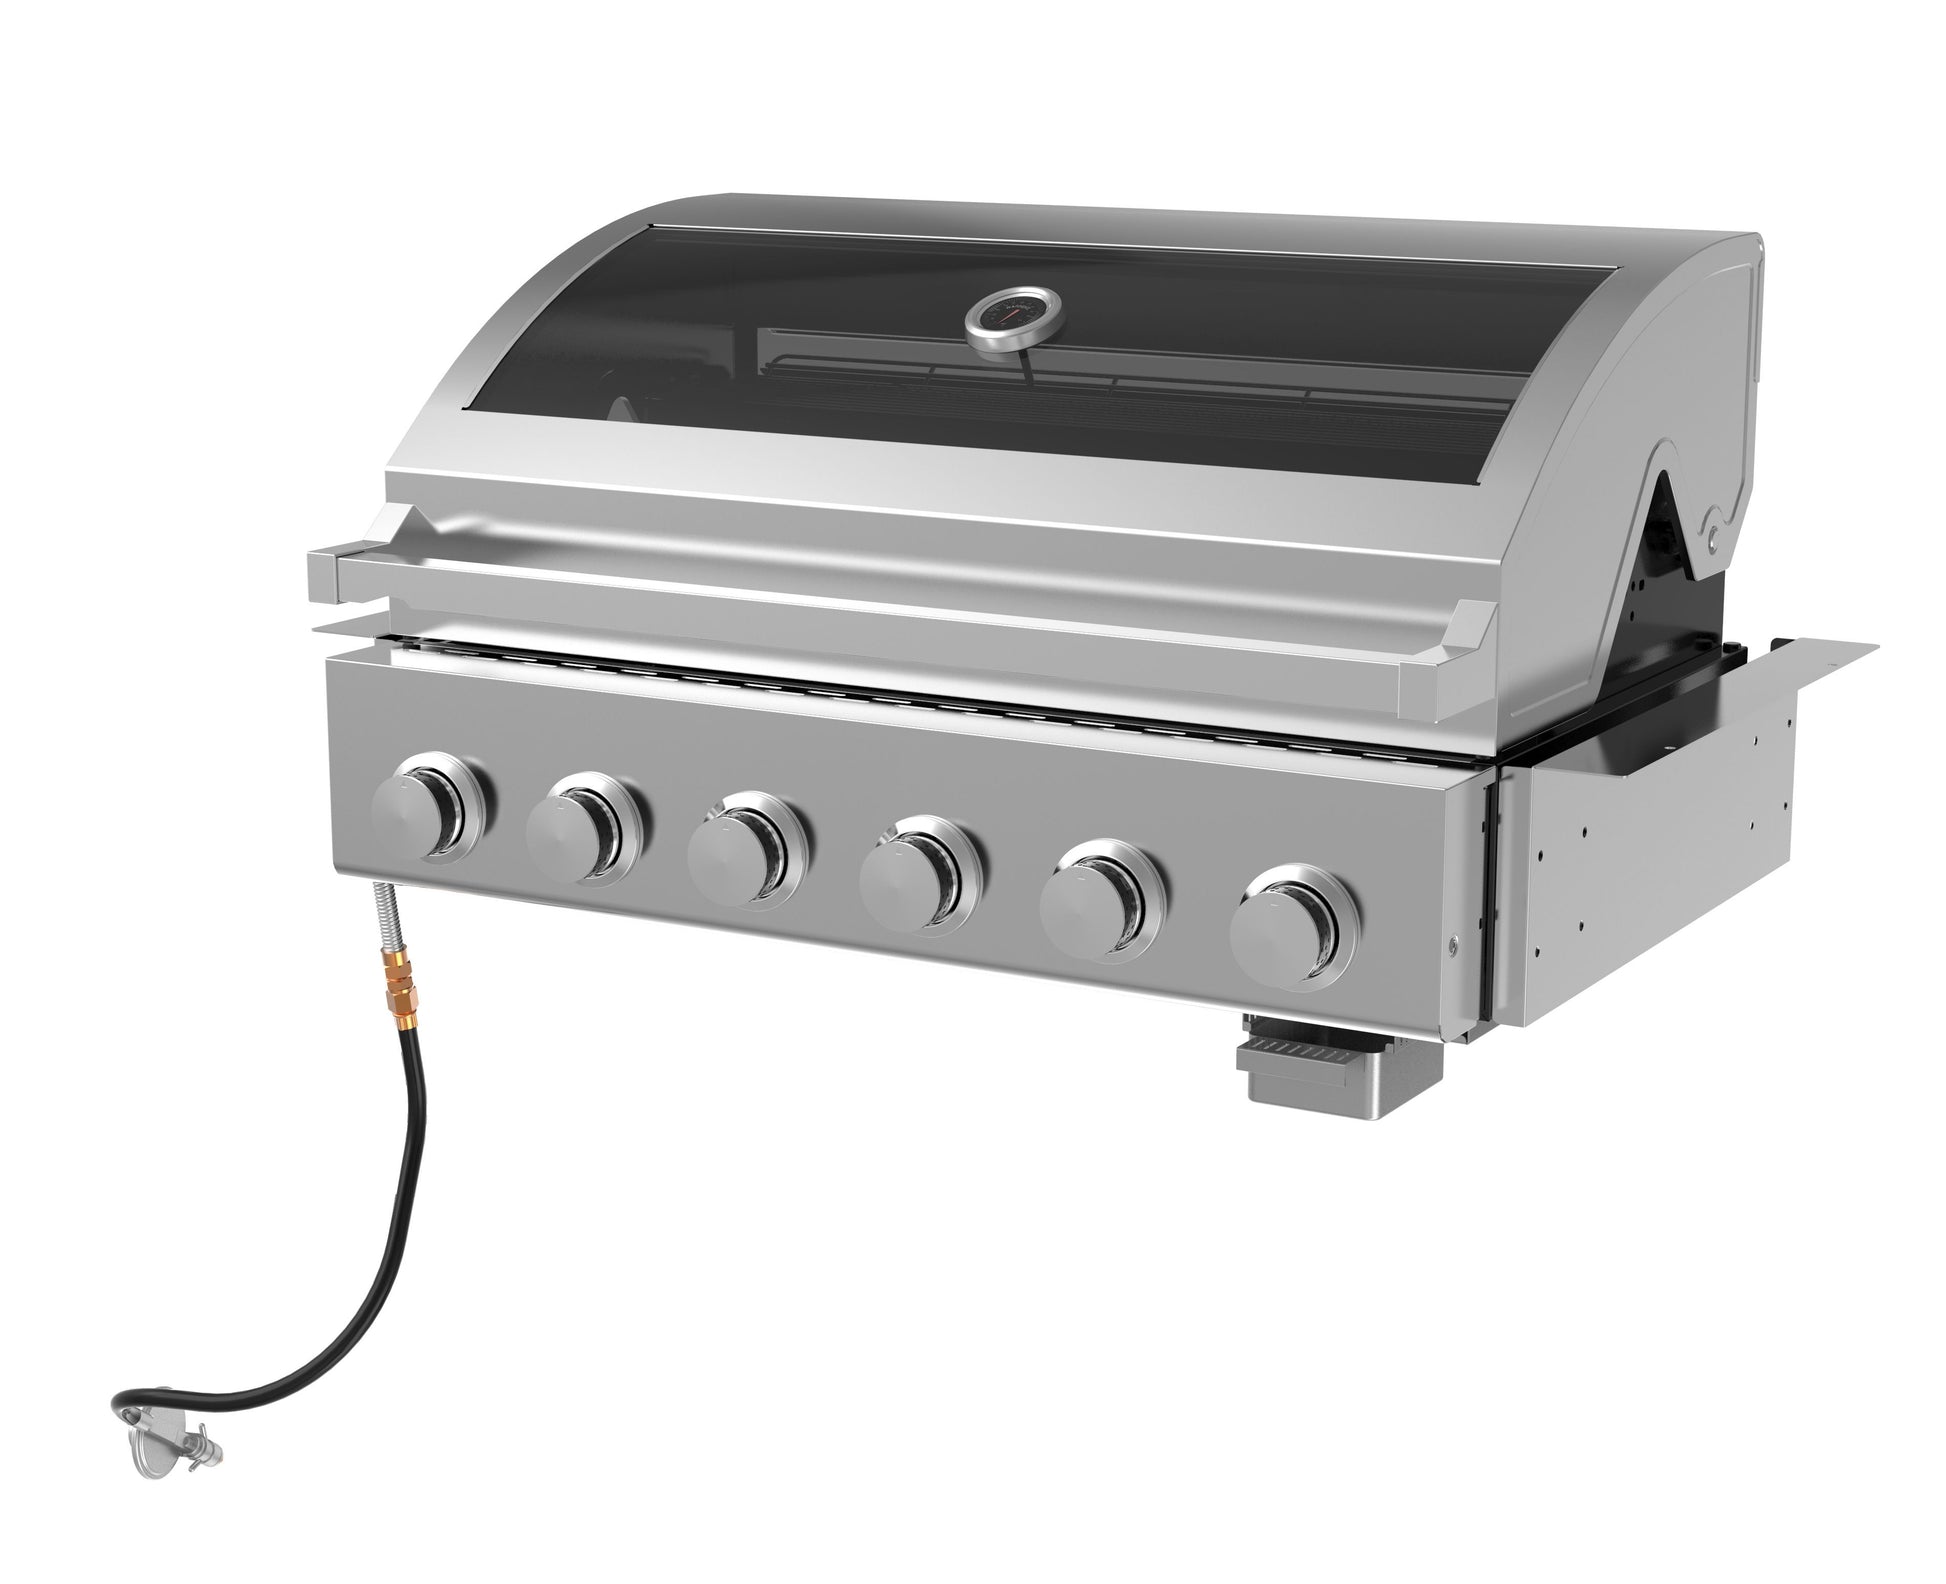 Built-in - Gas grill with 6 burners